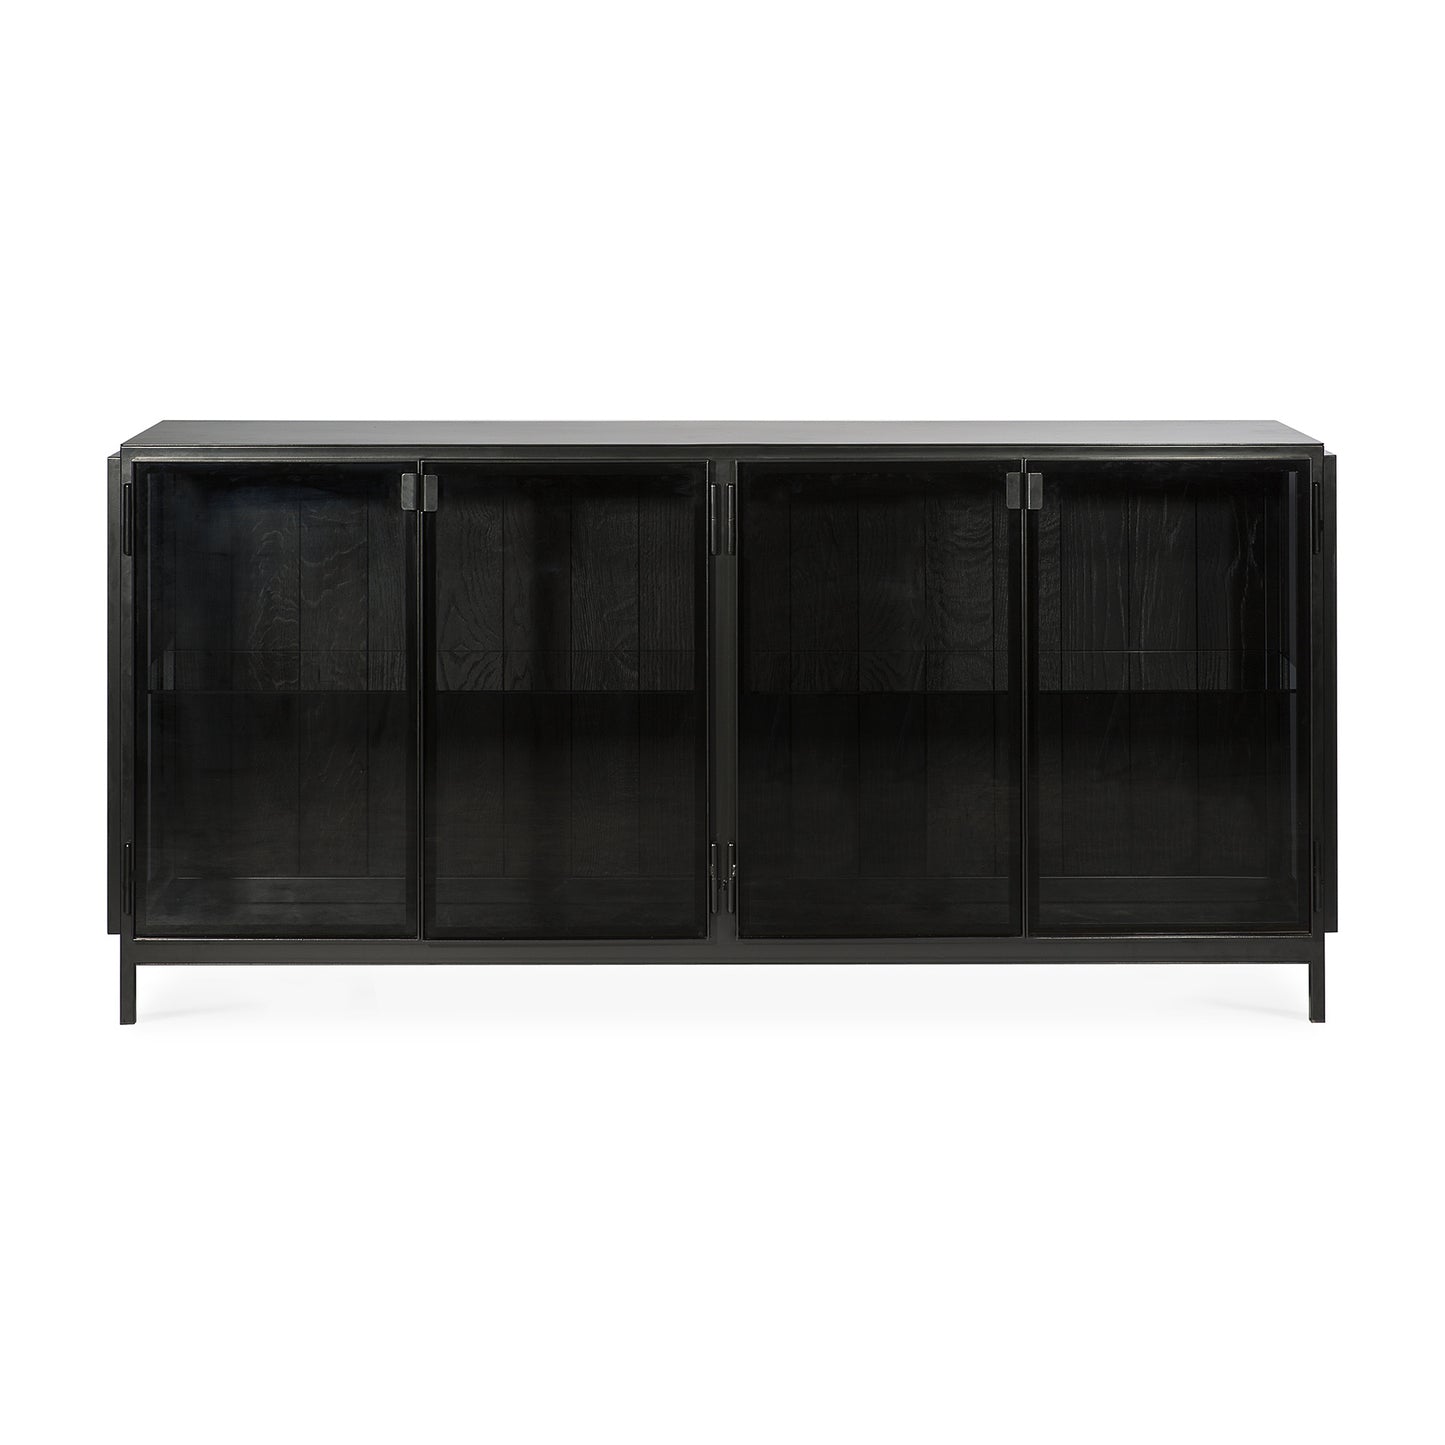 Ethnicraft Anders Sideboard Buffet is available from Make Your House A Home, Bendigo, Victoria, Australia